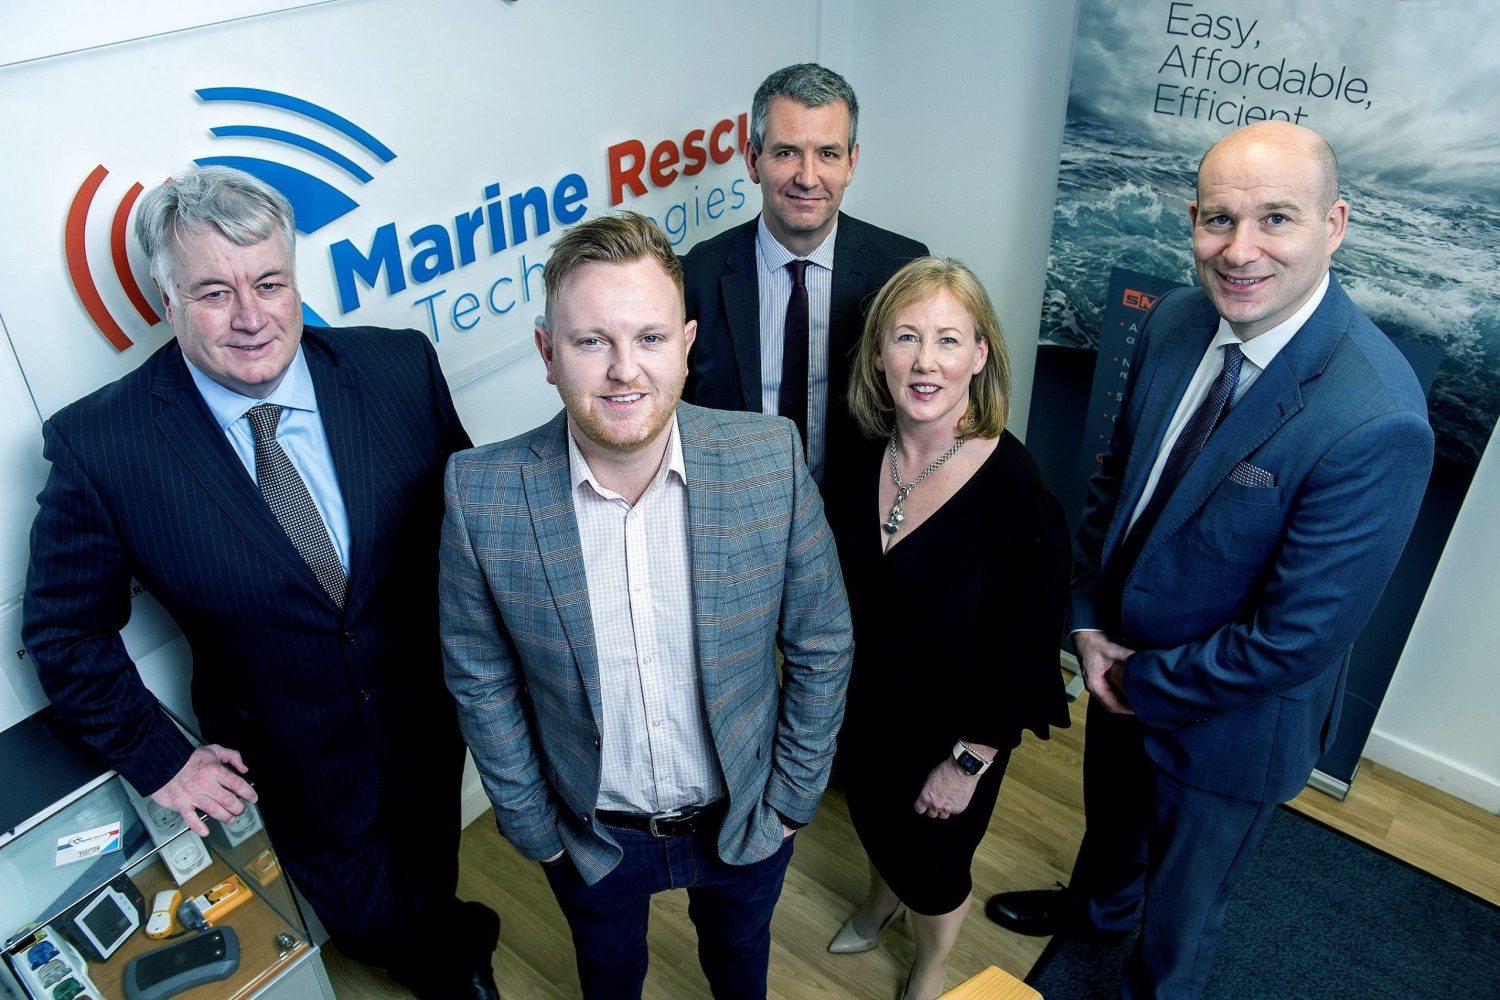 Five people standing in front of Marine Rescue Technologies poster in an office. Man to the far left is bald and is wearing a blue shirt with a white shirt and dark navy tie, woman to the left of him is wearing a black dress. The remaining people are men. There is one man directly behind the woman wearing a black jacket and has a black tie and a man to the far left leaning against the Marine Rescue Technologies poster wearing a navy suit with a light blue shirt.